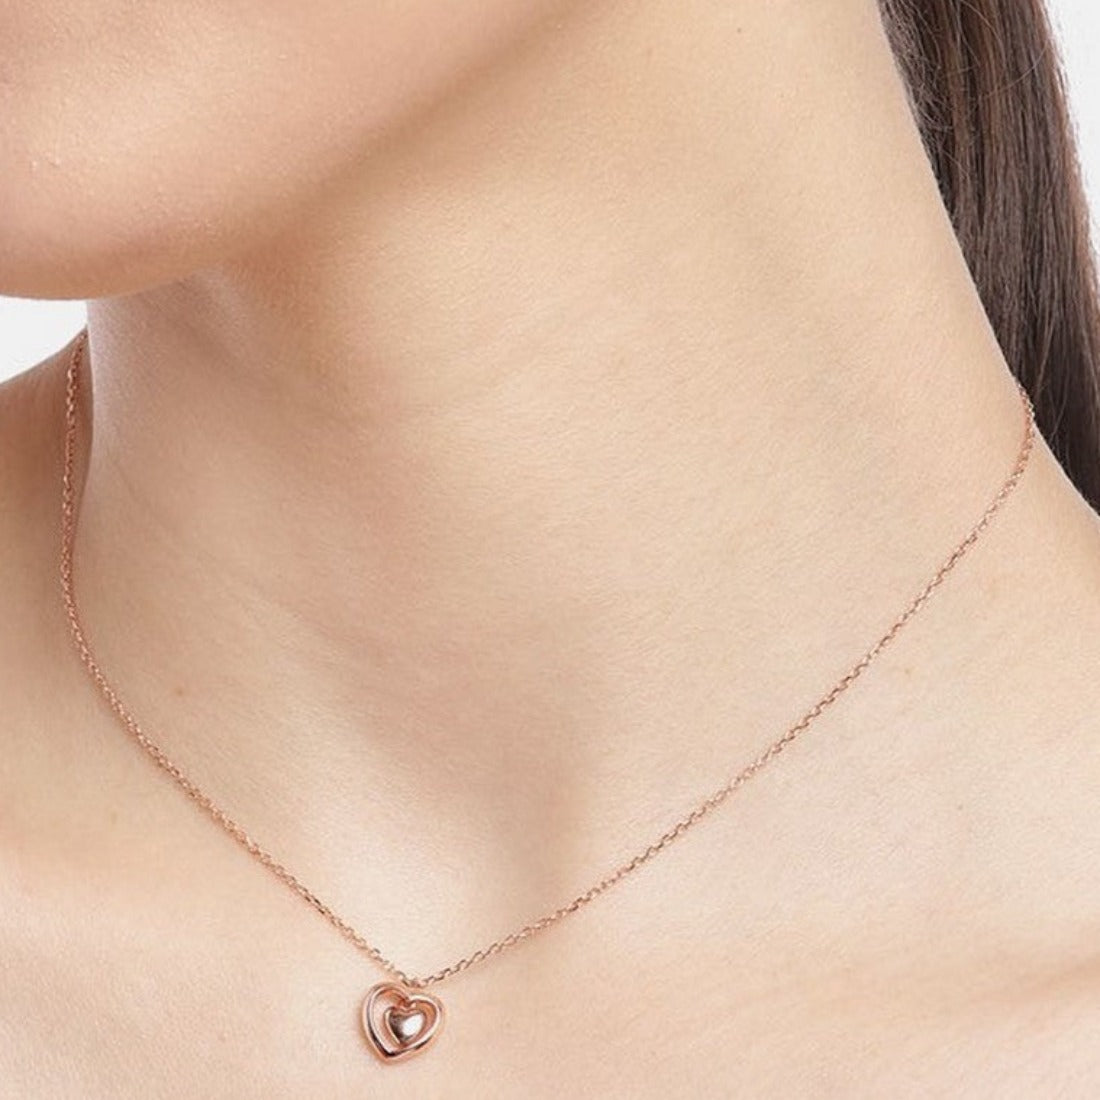 Heart & Love Rose Gold Plated 925 Sterling Silver Necklace